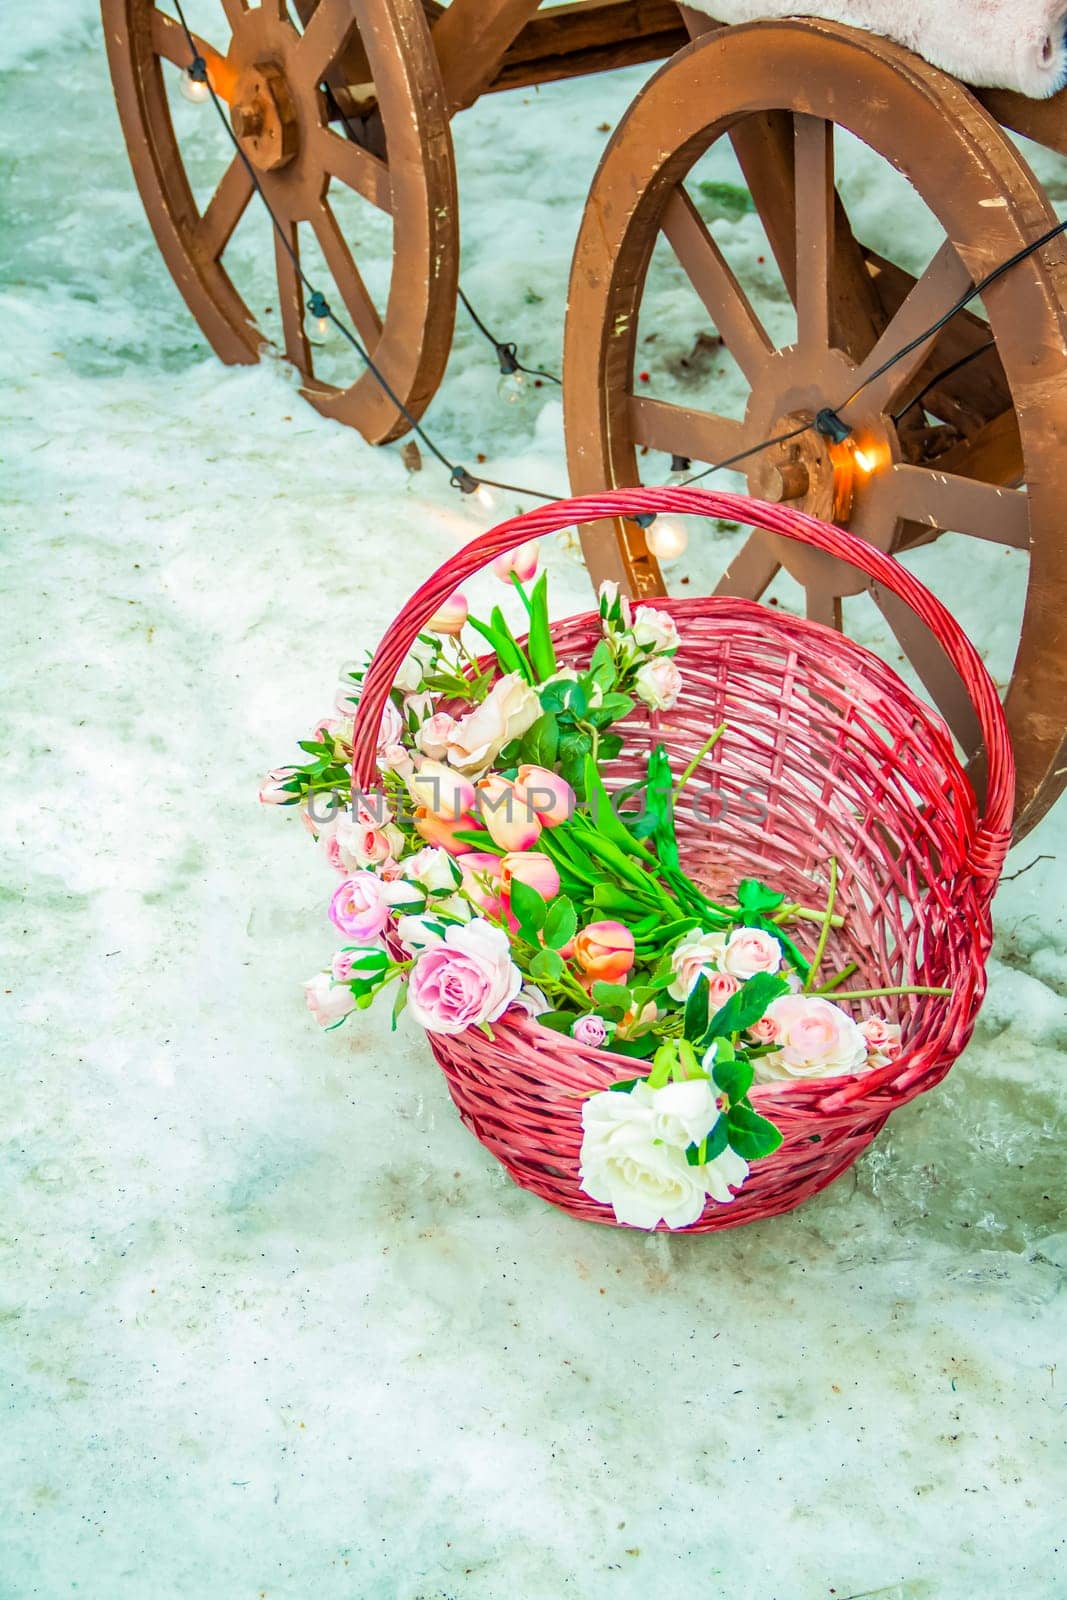 A wicker basket with beautiful flowers stands on the snow near the cart wheel. Flowers in a pink basket